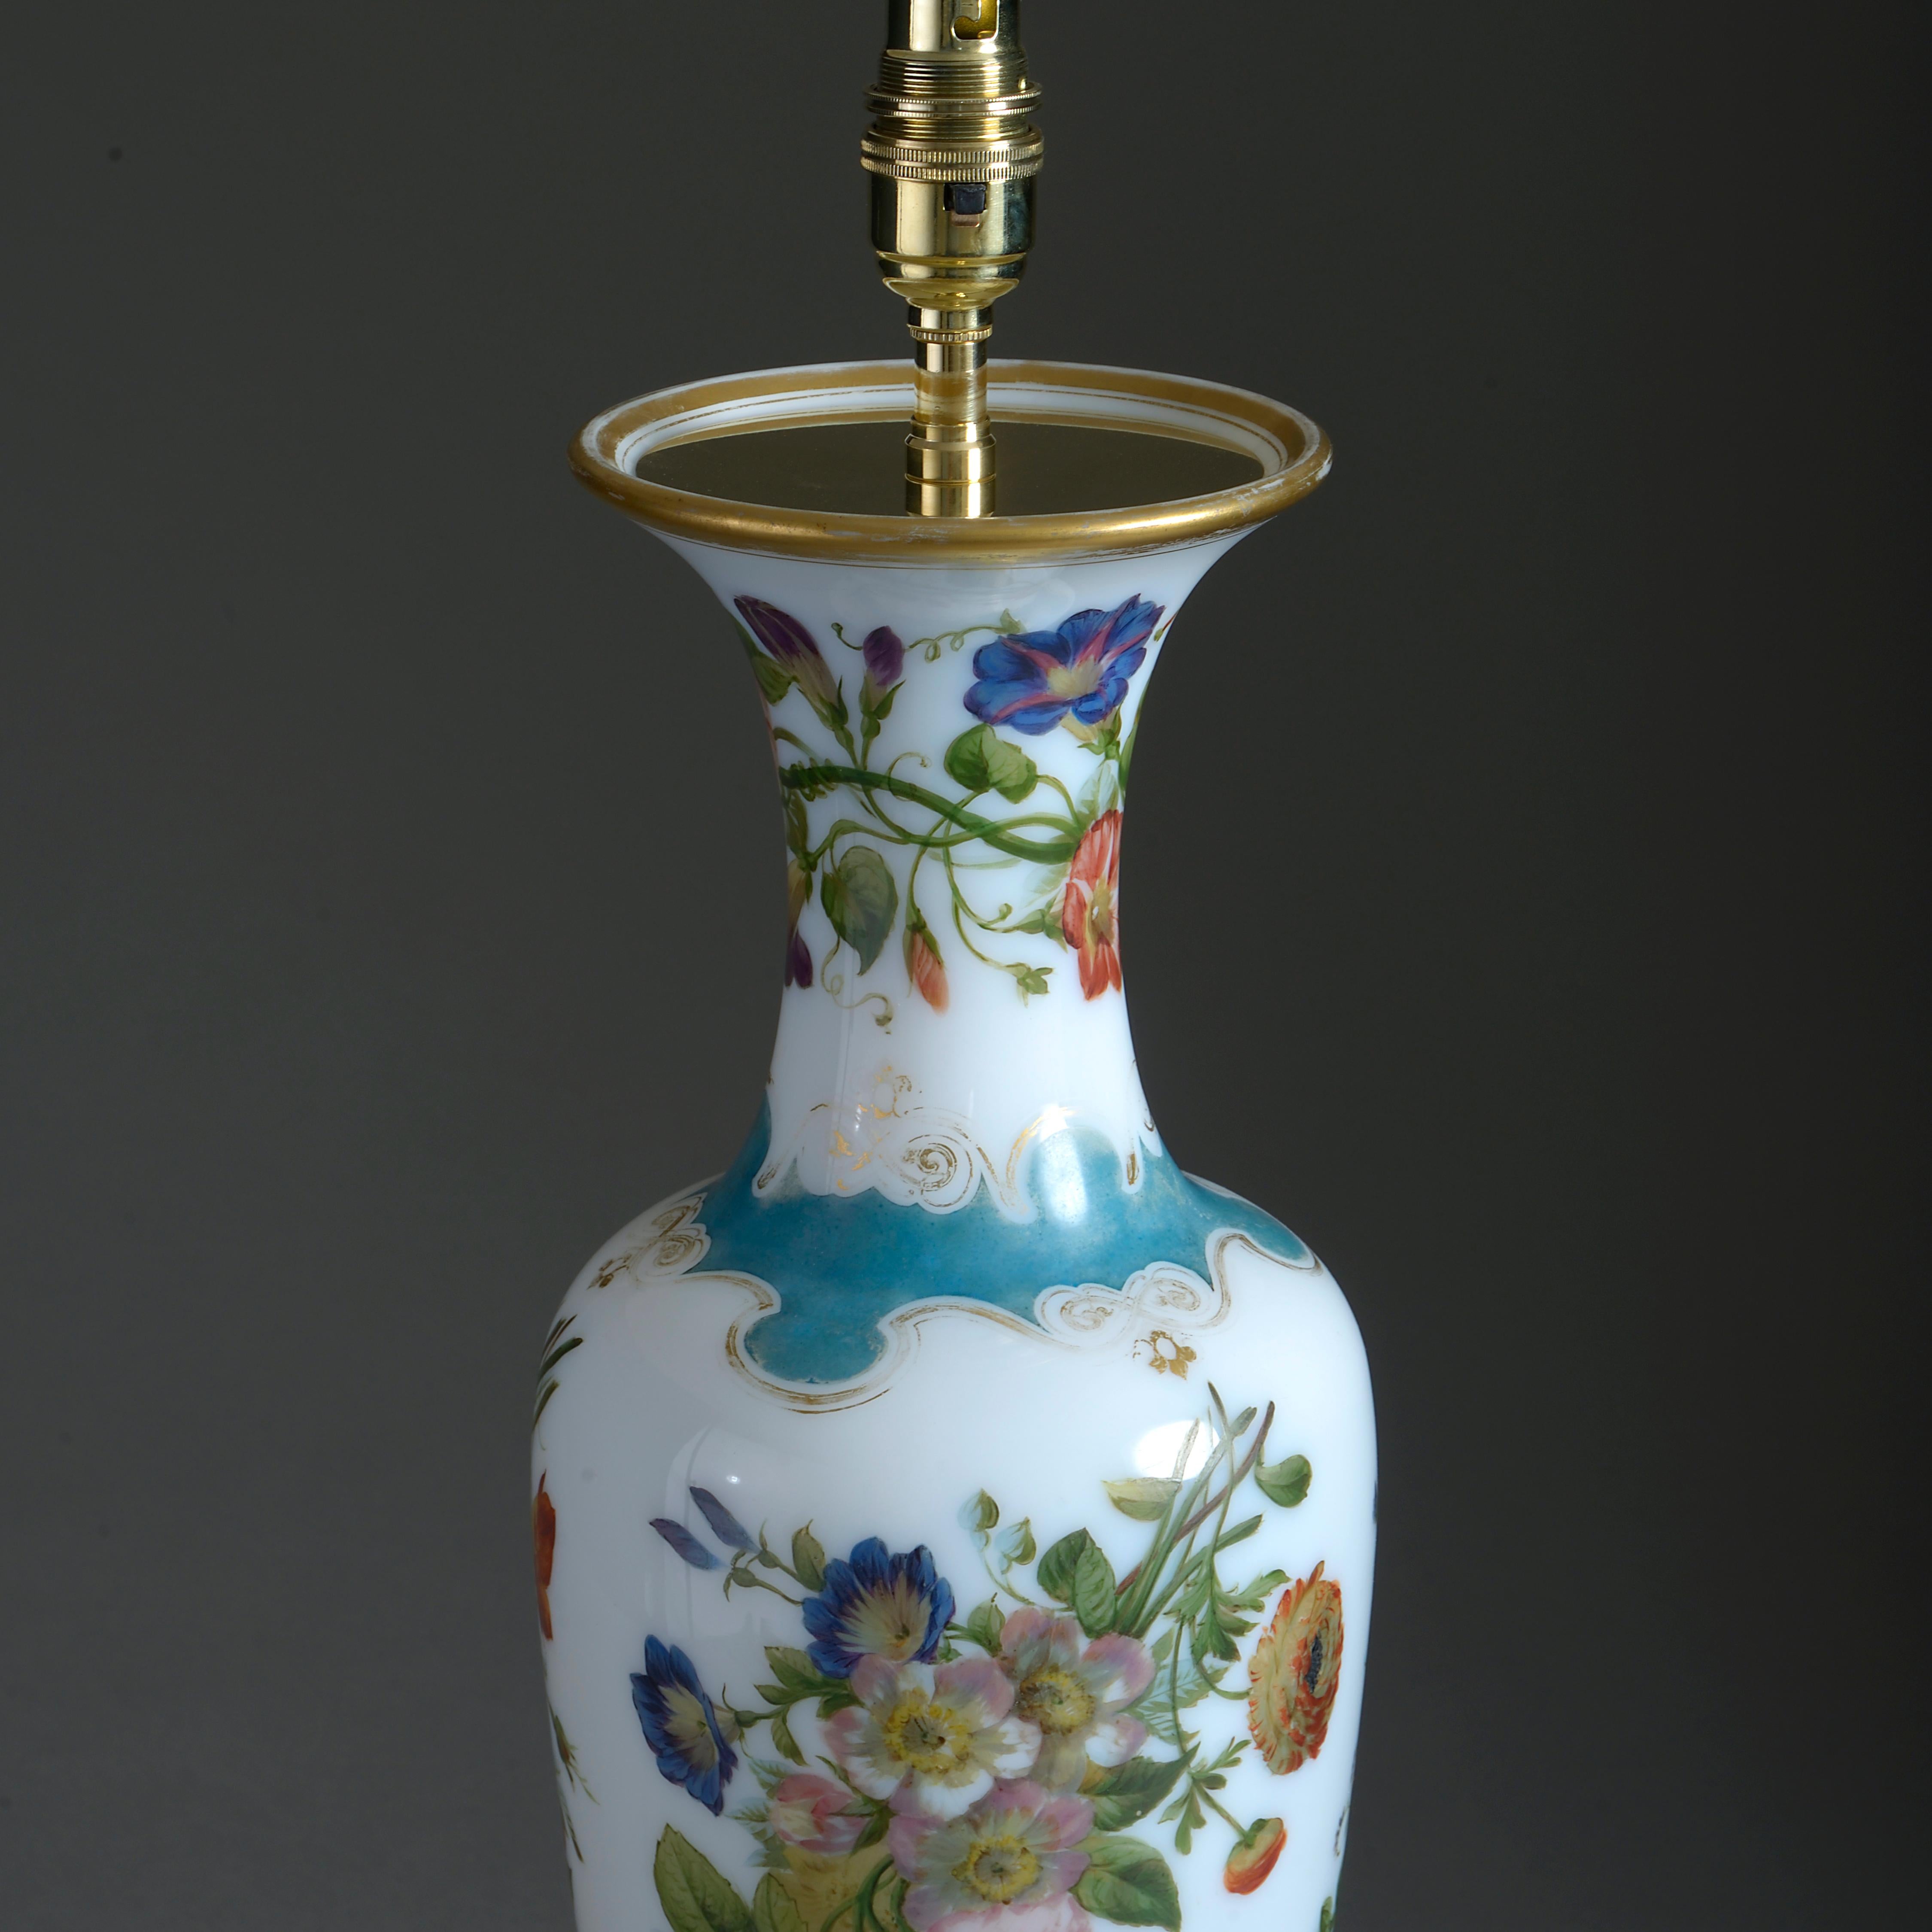 Hand-Painted Large 19th Century Opaline Vase Lamp